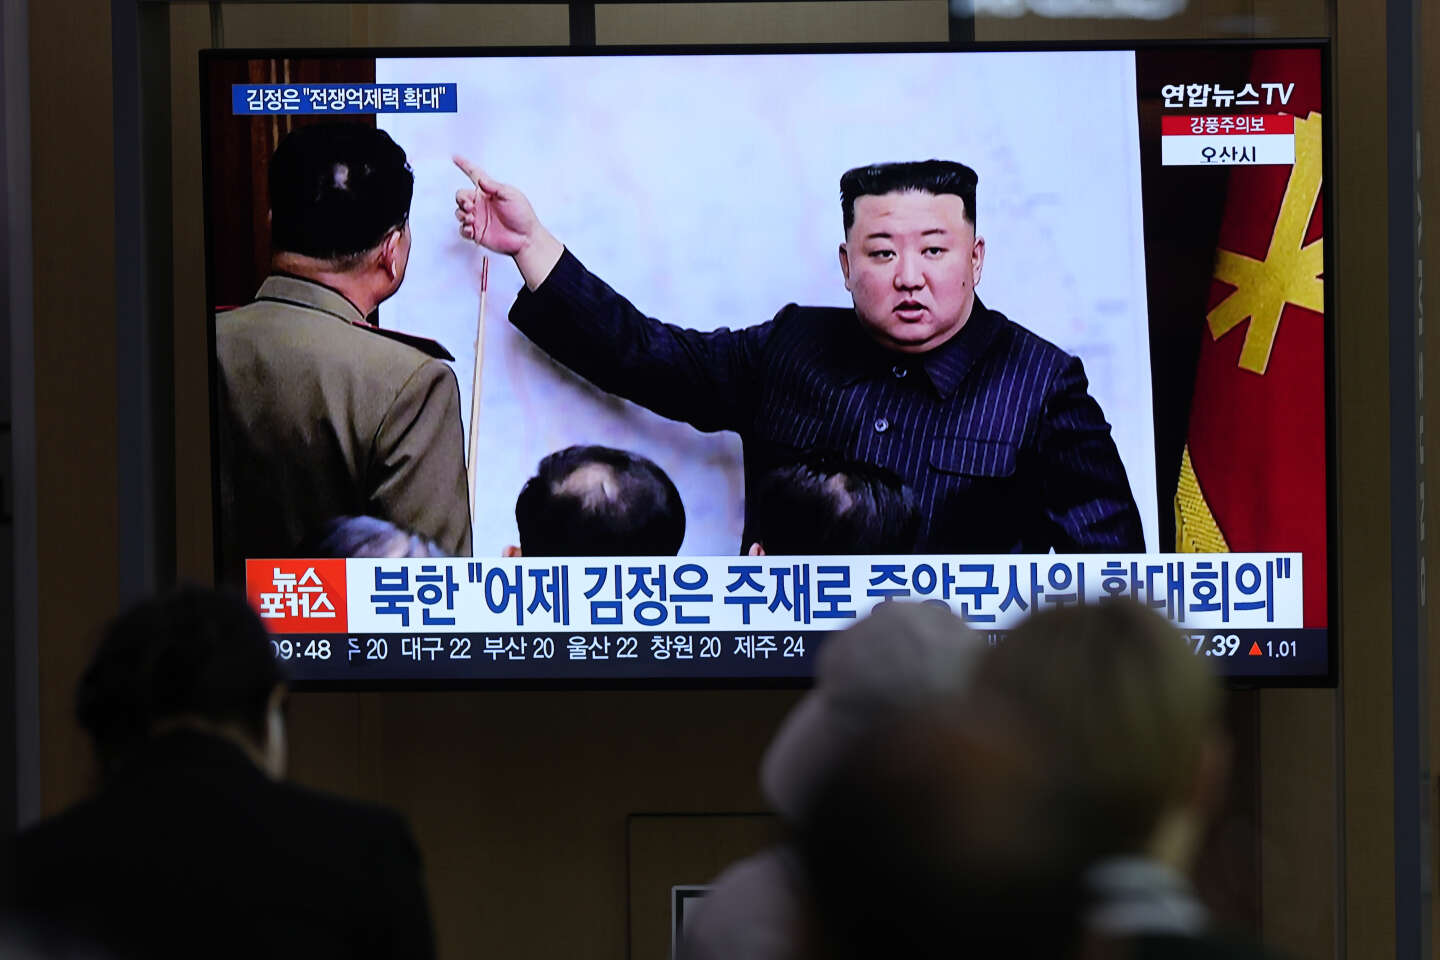 North Korea launches ballistic missile, Japan ordered to withdraw from Hokkaido